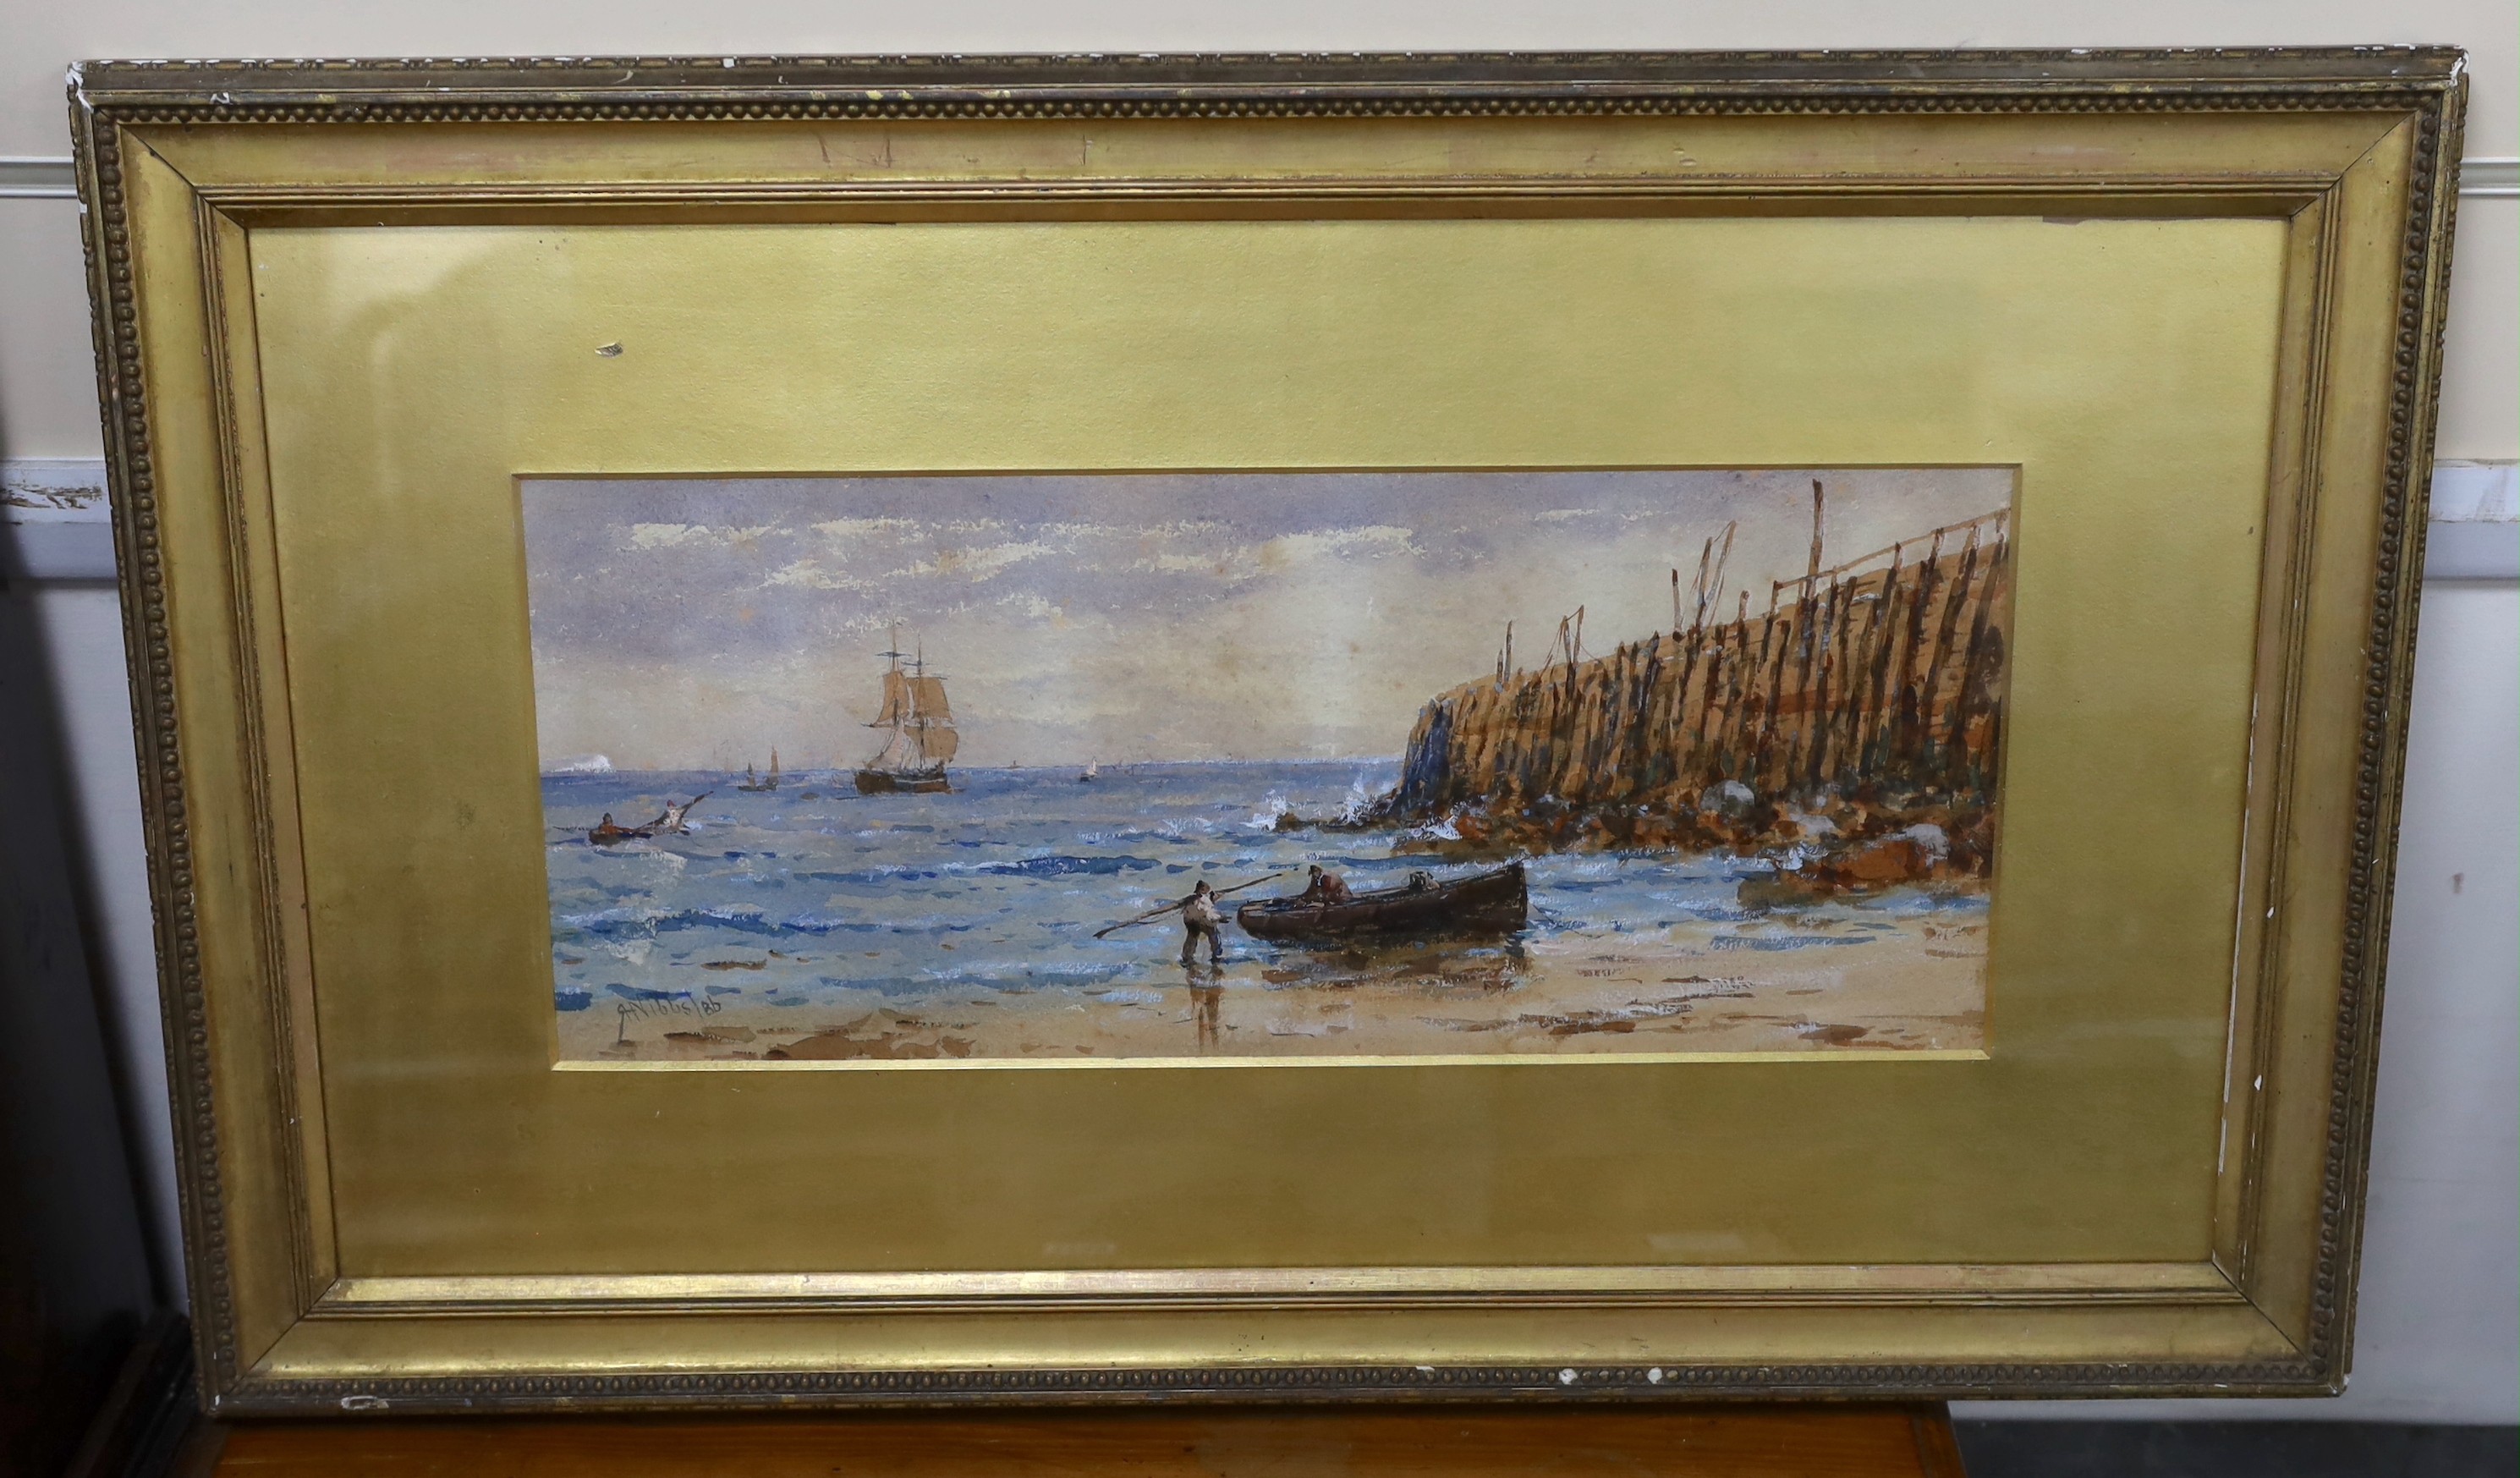 Richard Henry Nibbs (1816-1893), watercolour, Fisherfolk along the coast, signed and dated '86, 20 x 48cm